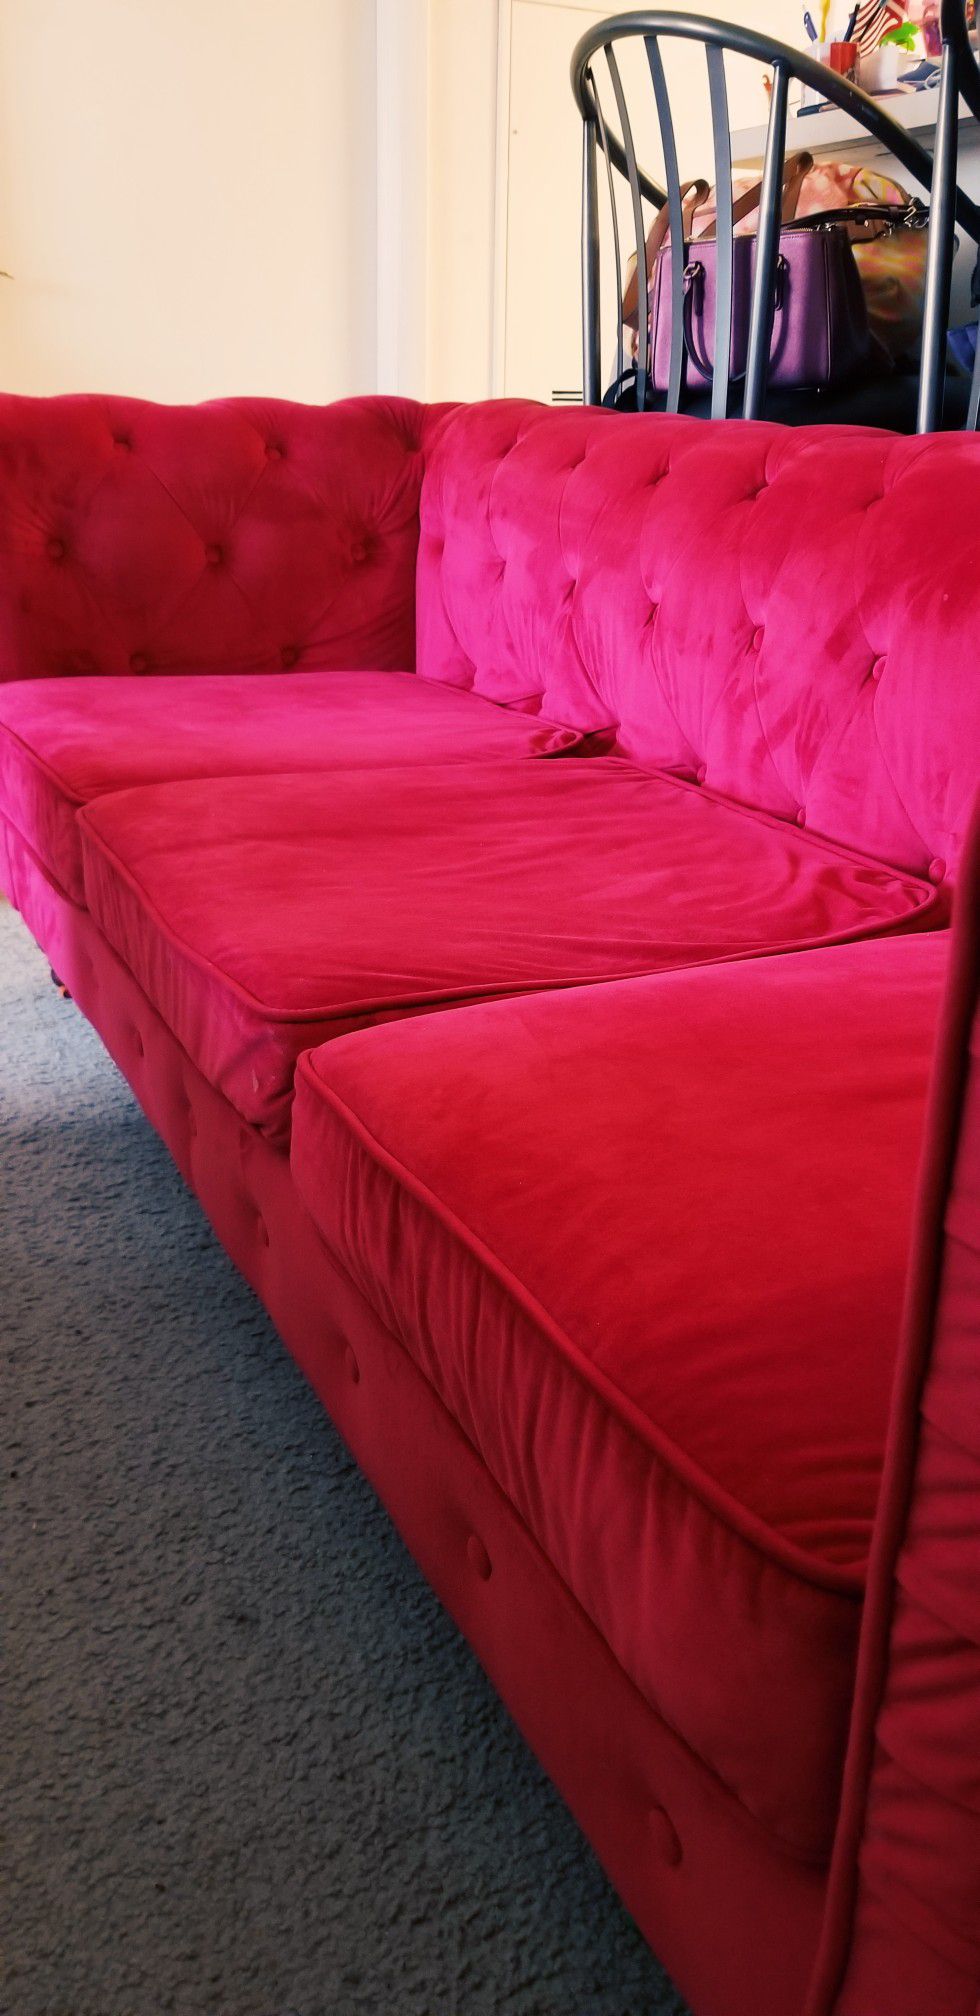 Clean Red Suede Couch